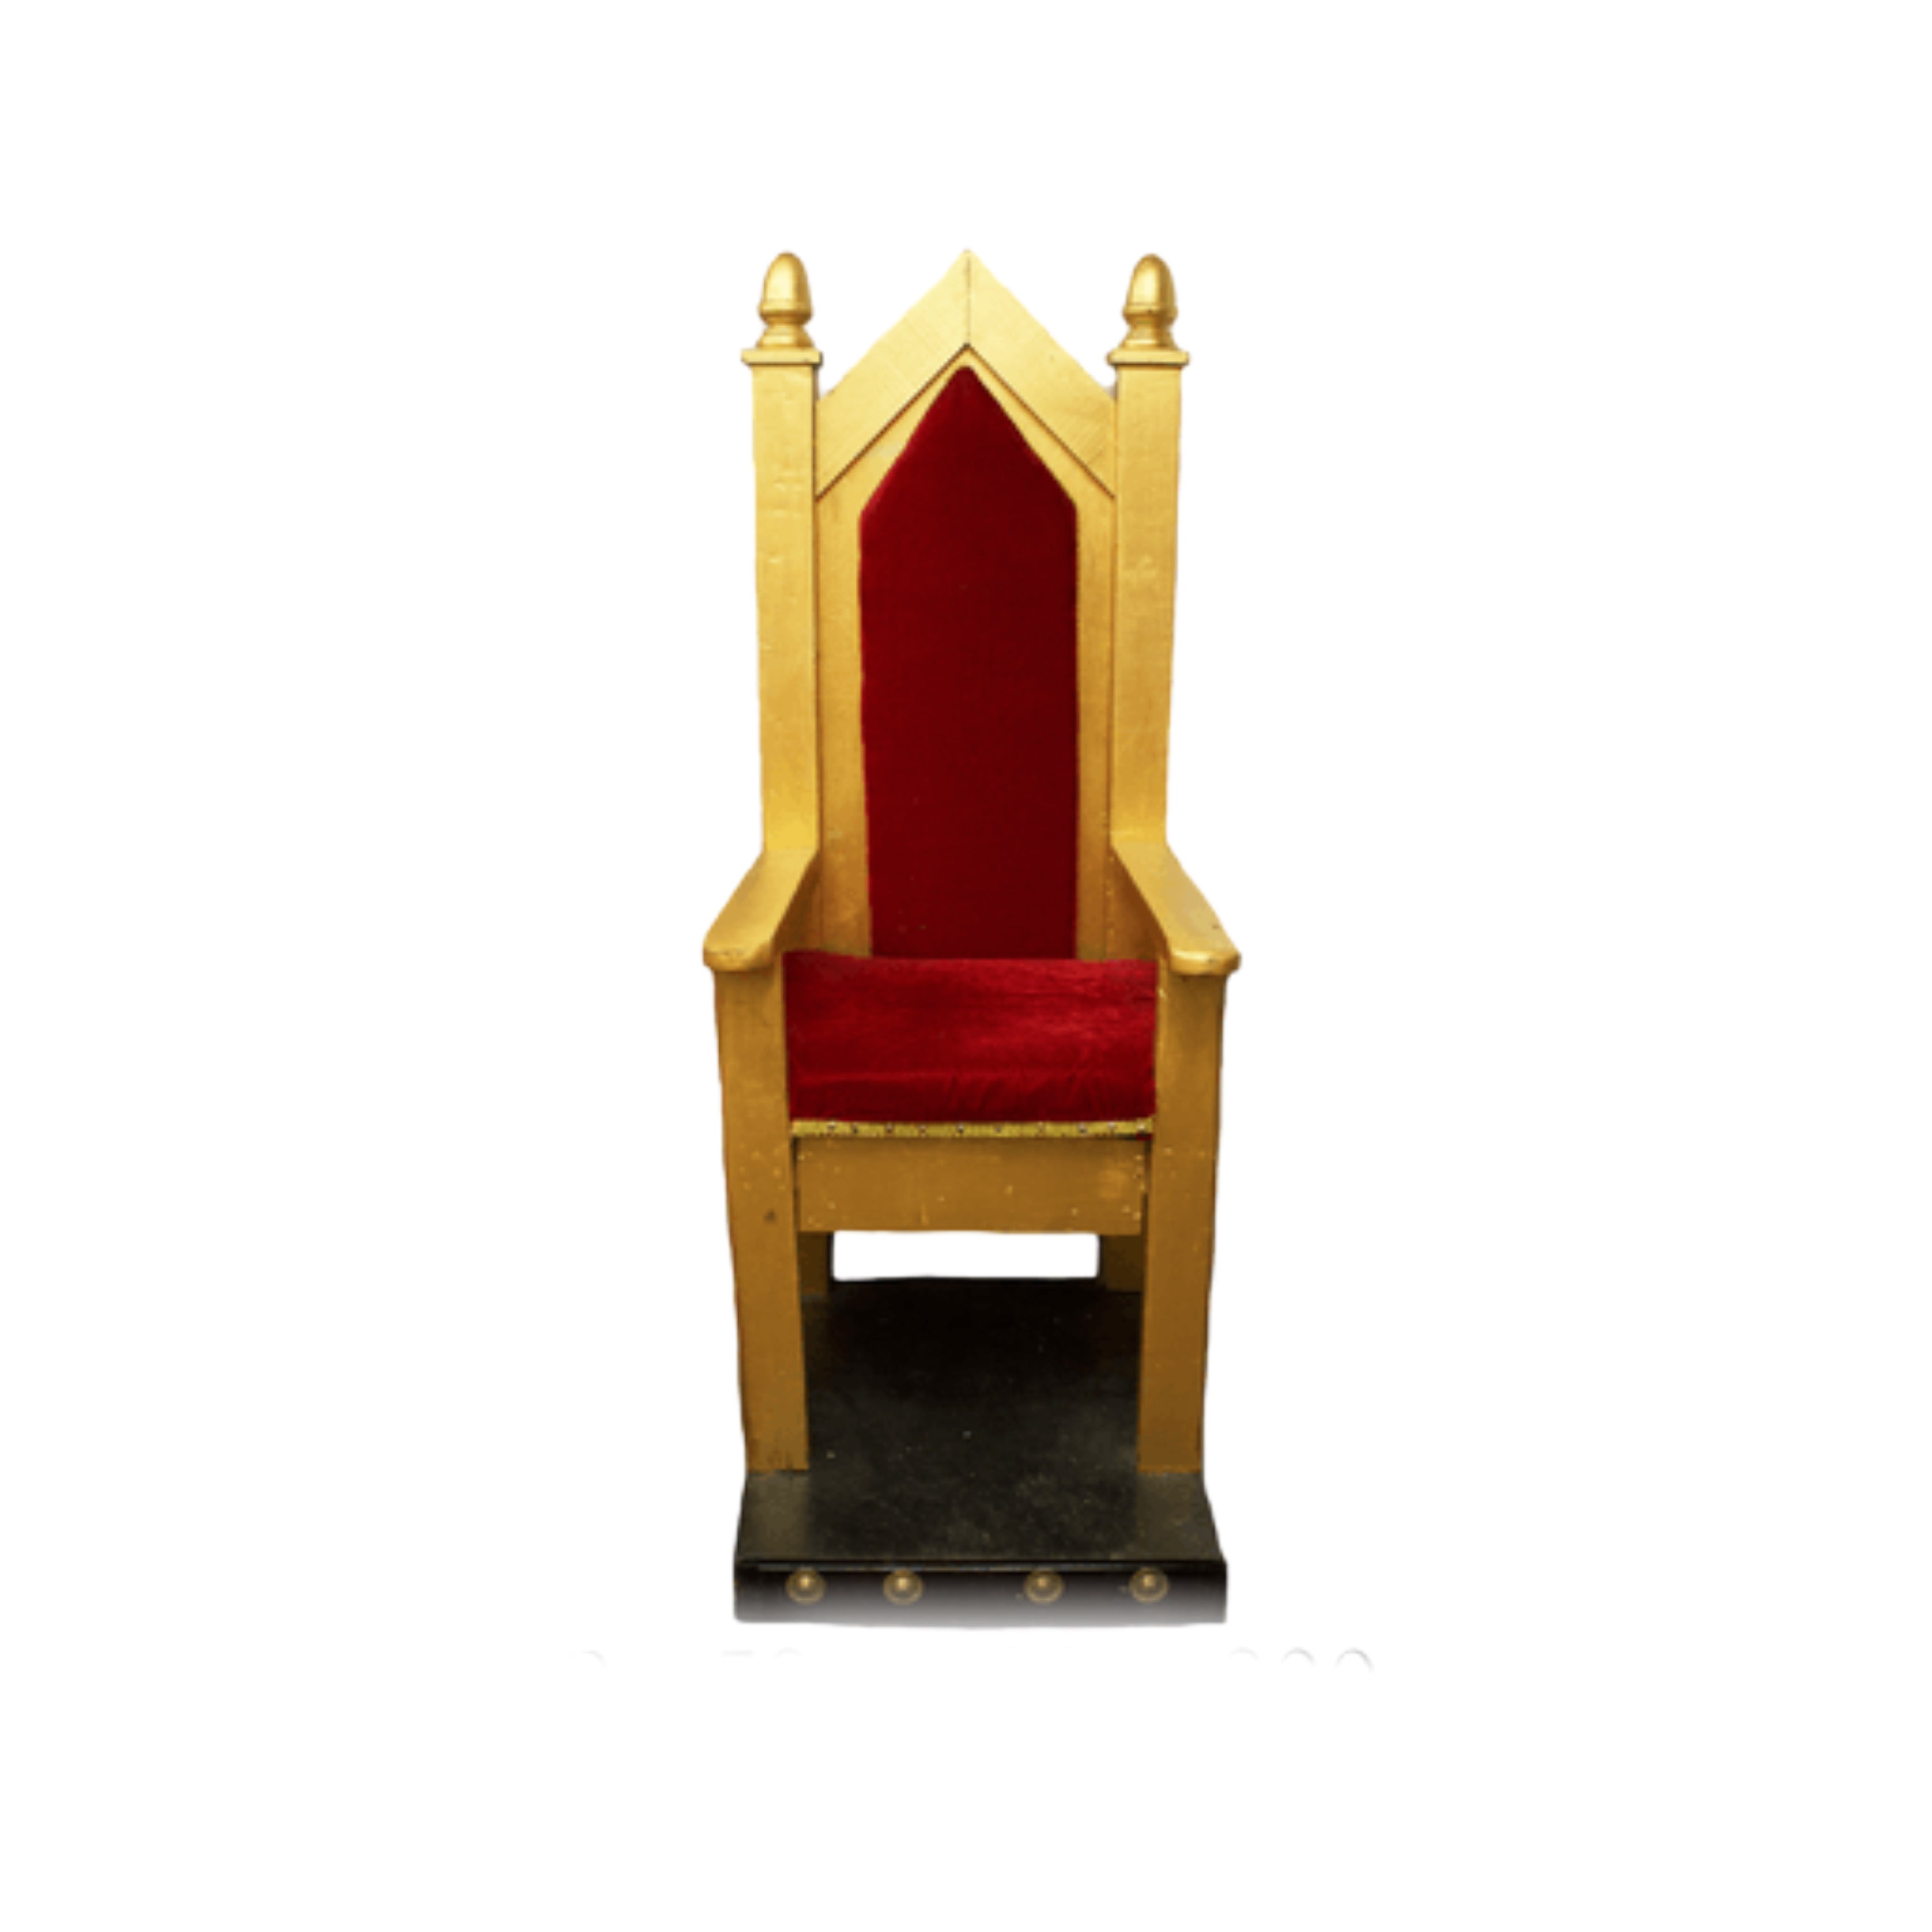 Rental King/Queen Throne Chair- must call the store to schedule and confirm  this rental